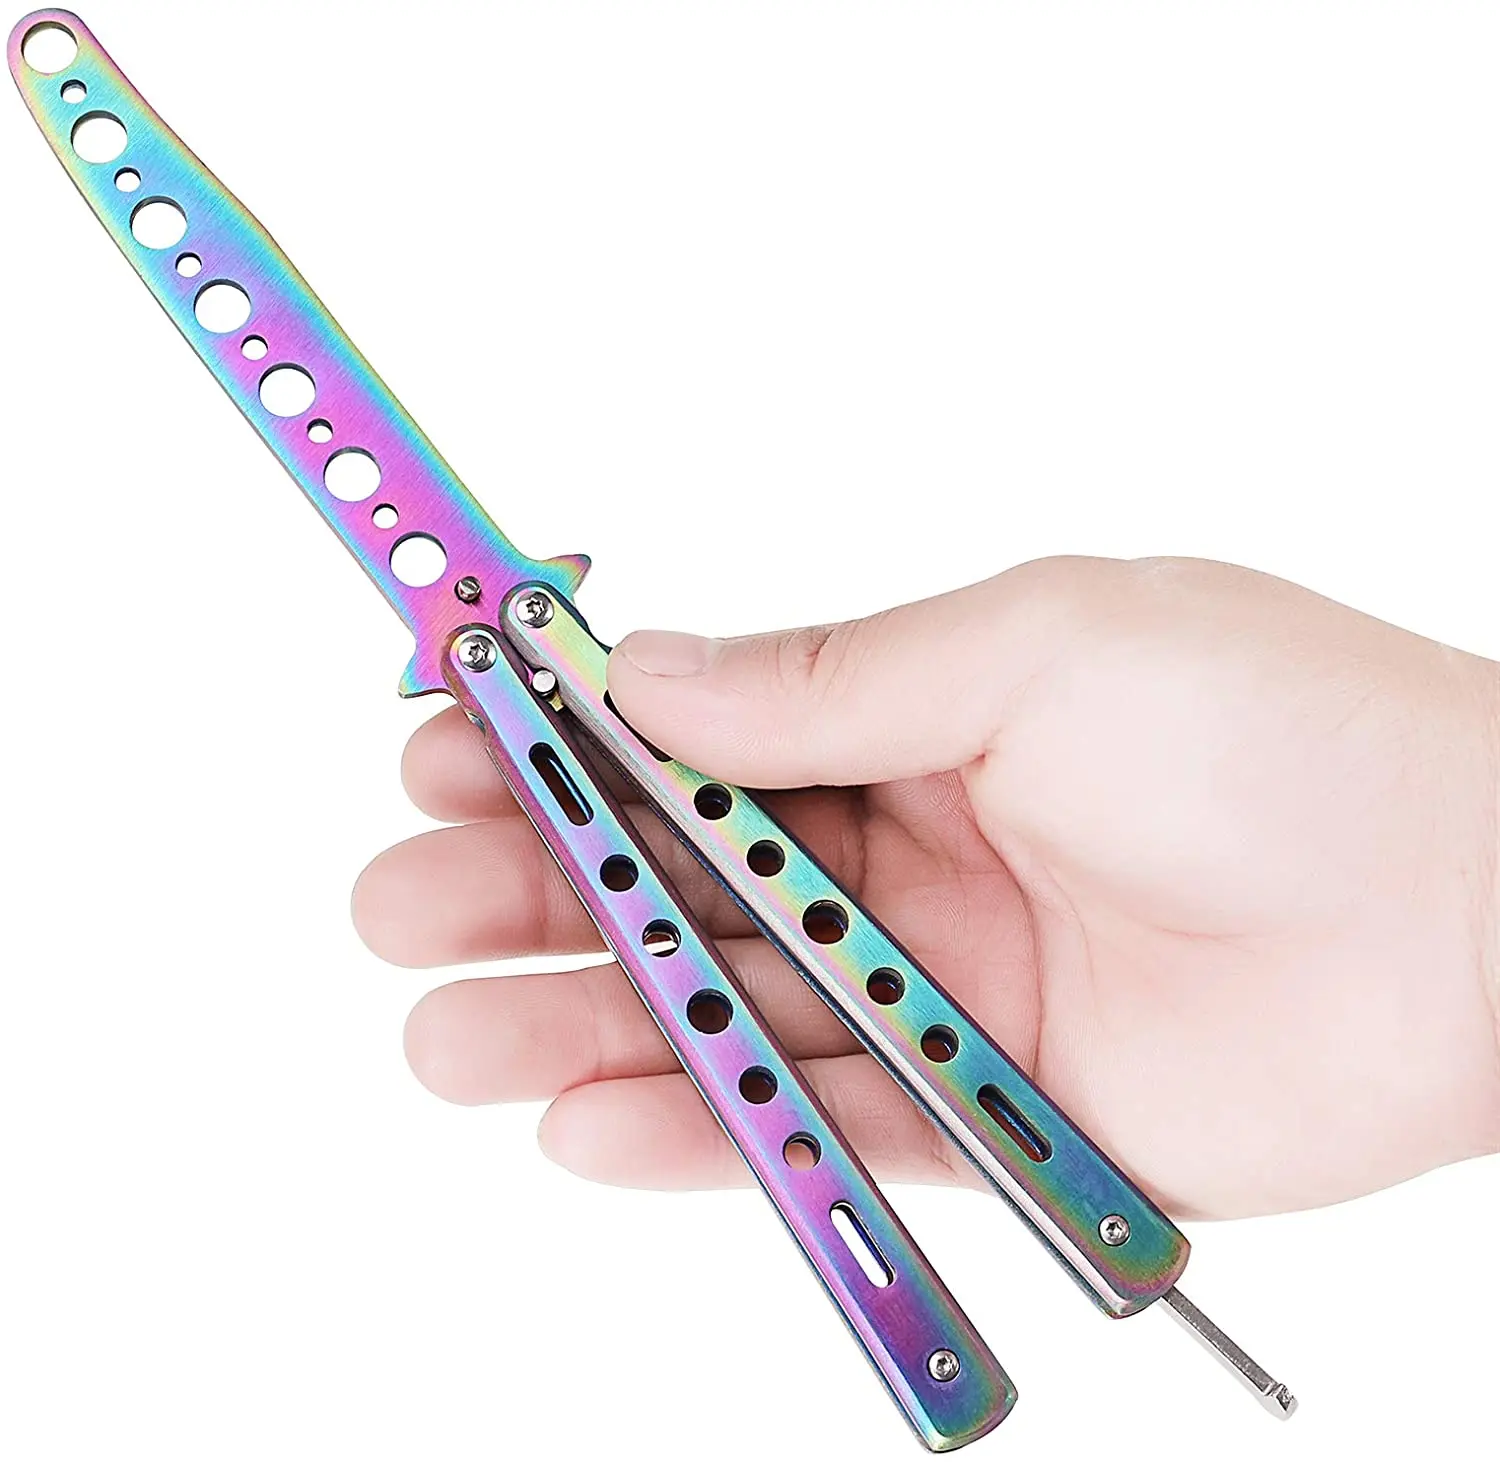 Unsharpened Practice Training Balisong Stainless Steel butterfly knife